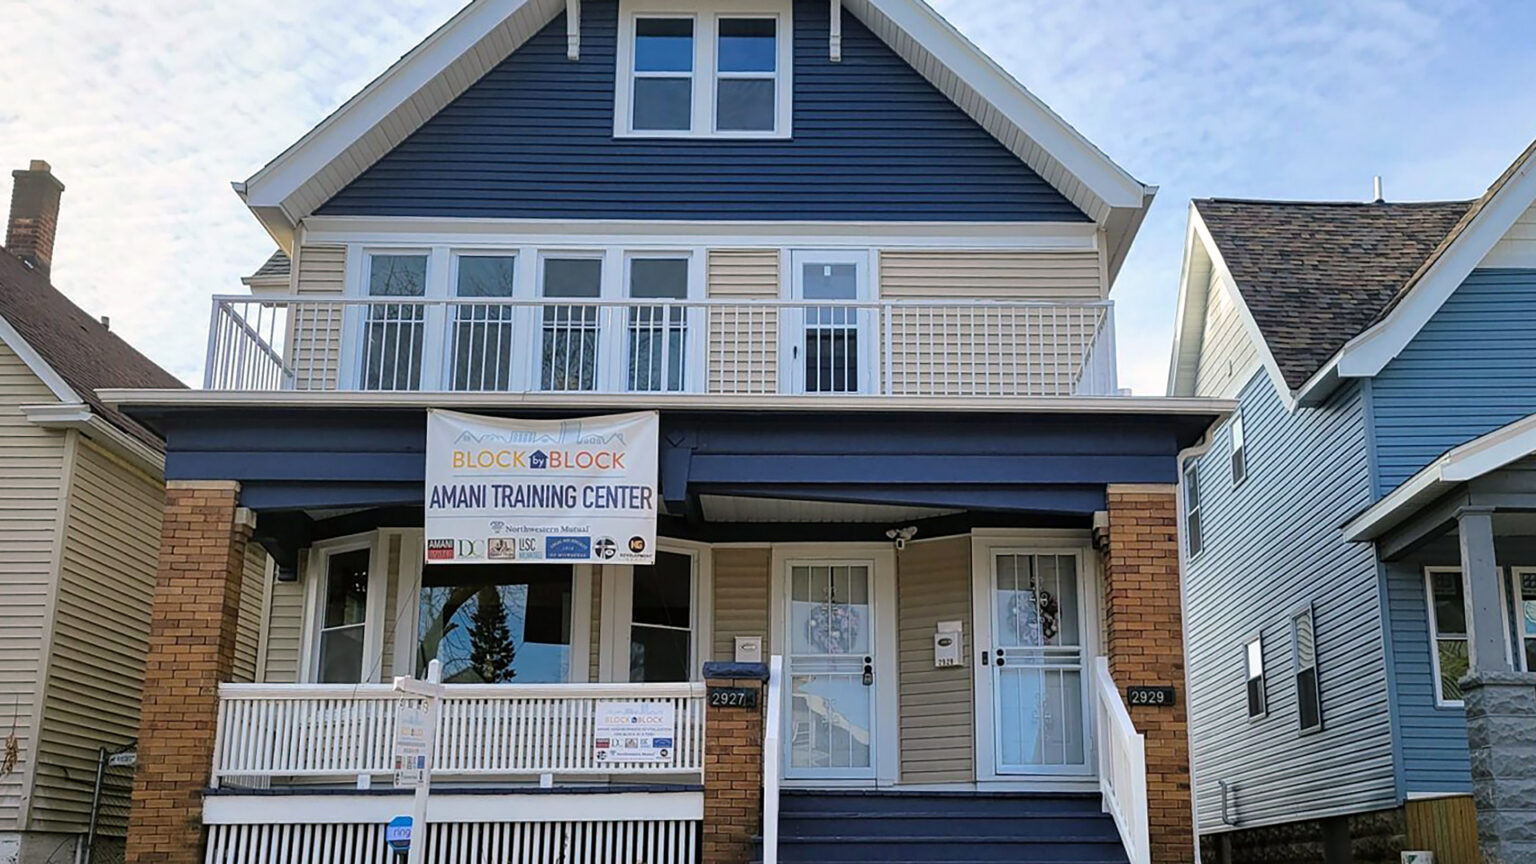 A two-story house with two apartment flats has a banner on its second-floor balcony reading Block by Block Amani Training Center with logos of sponsoring organizations.